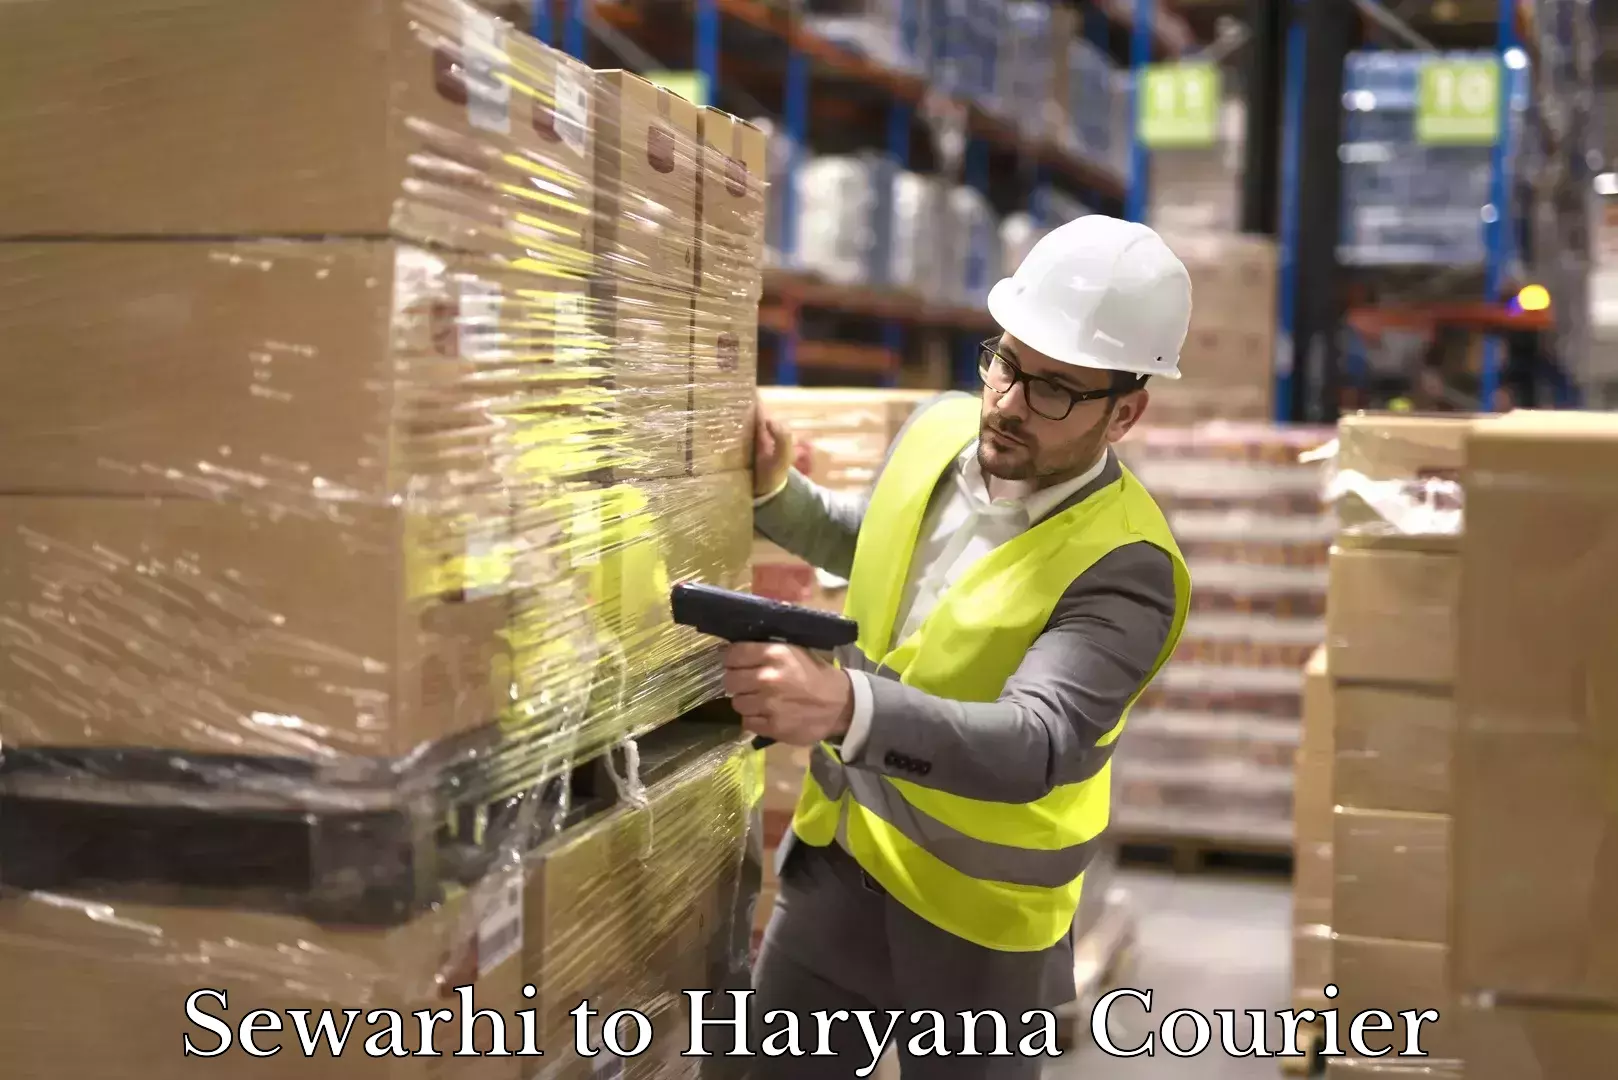 Package delivery network Sewarhi to Haryana